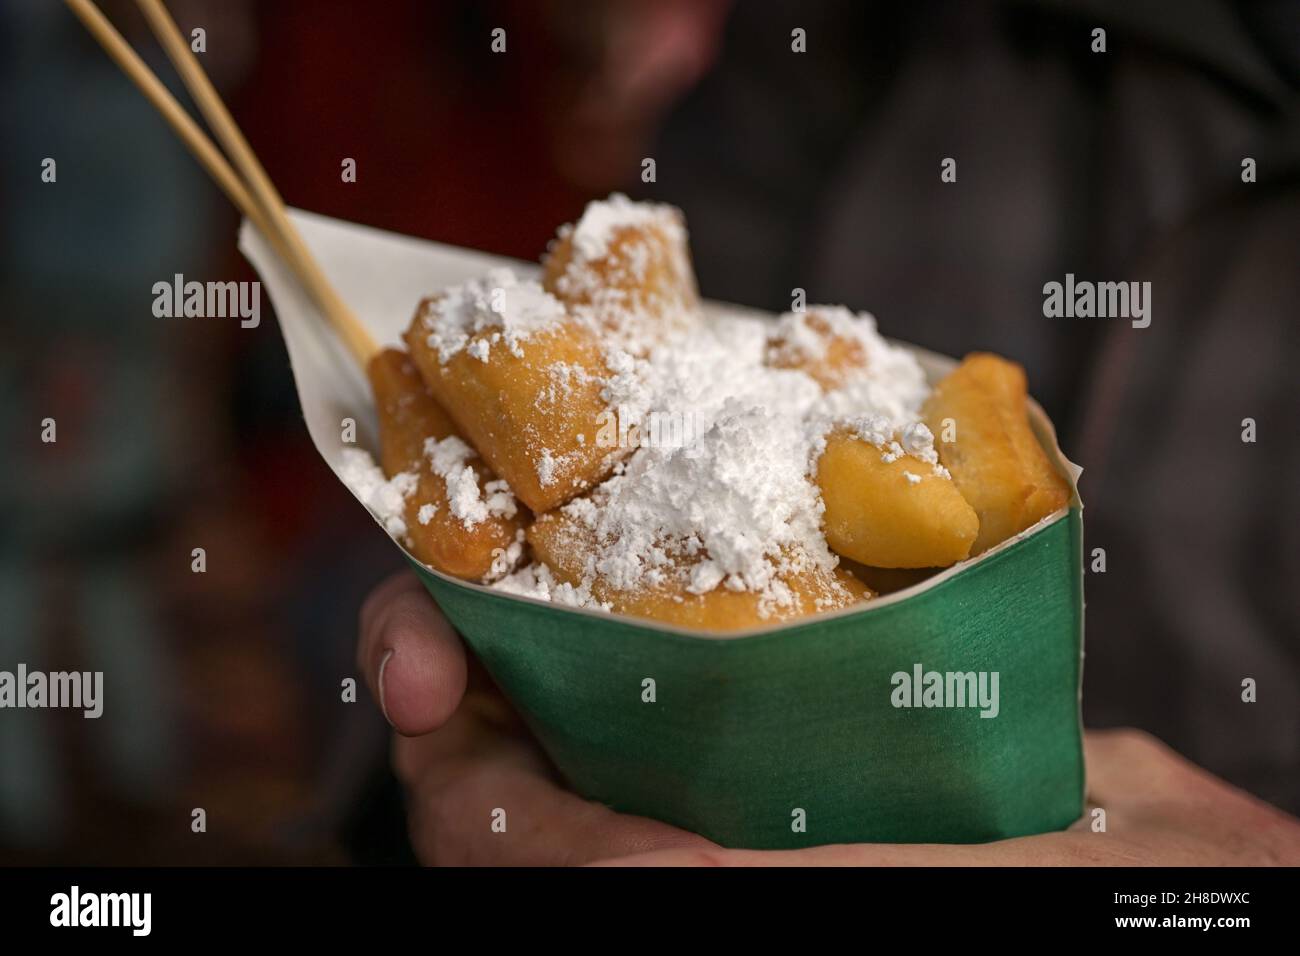 Hand holding a paper bag with mutzenmandeln, deep fried pastry with powdered sugar, typical sweet food for Christmas and new year at a market in Germa Stock Photo